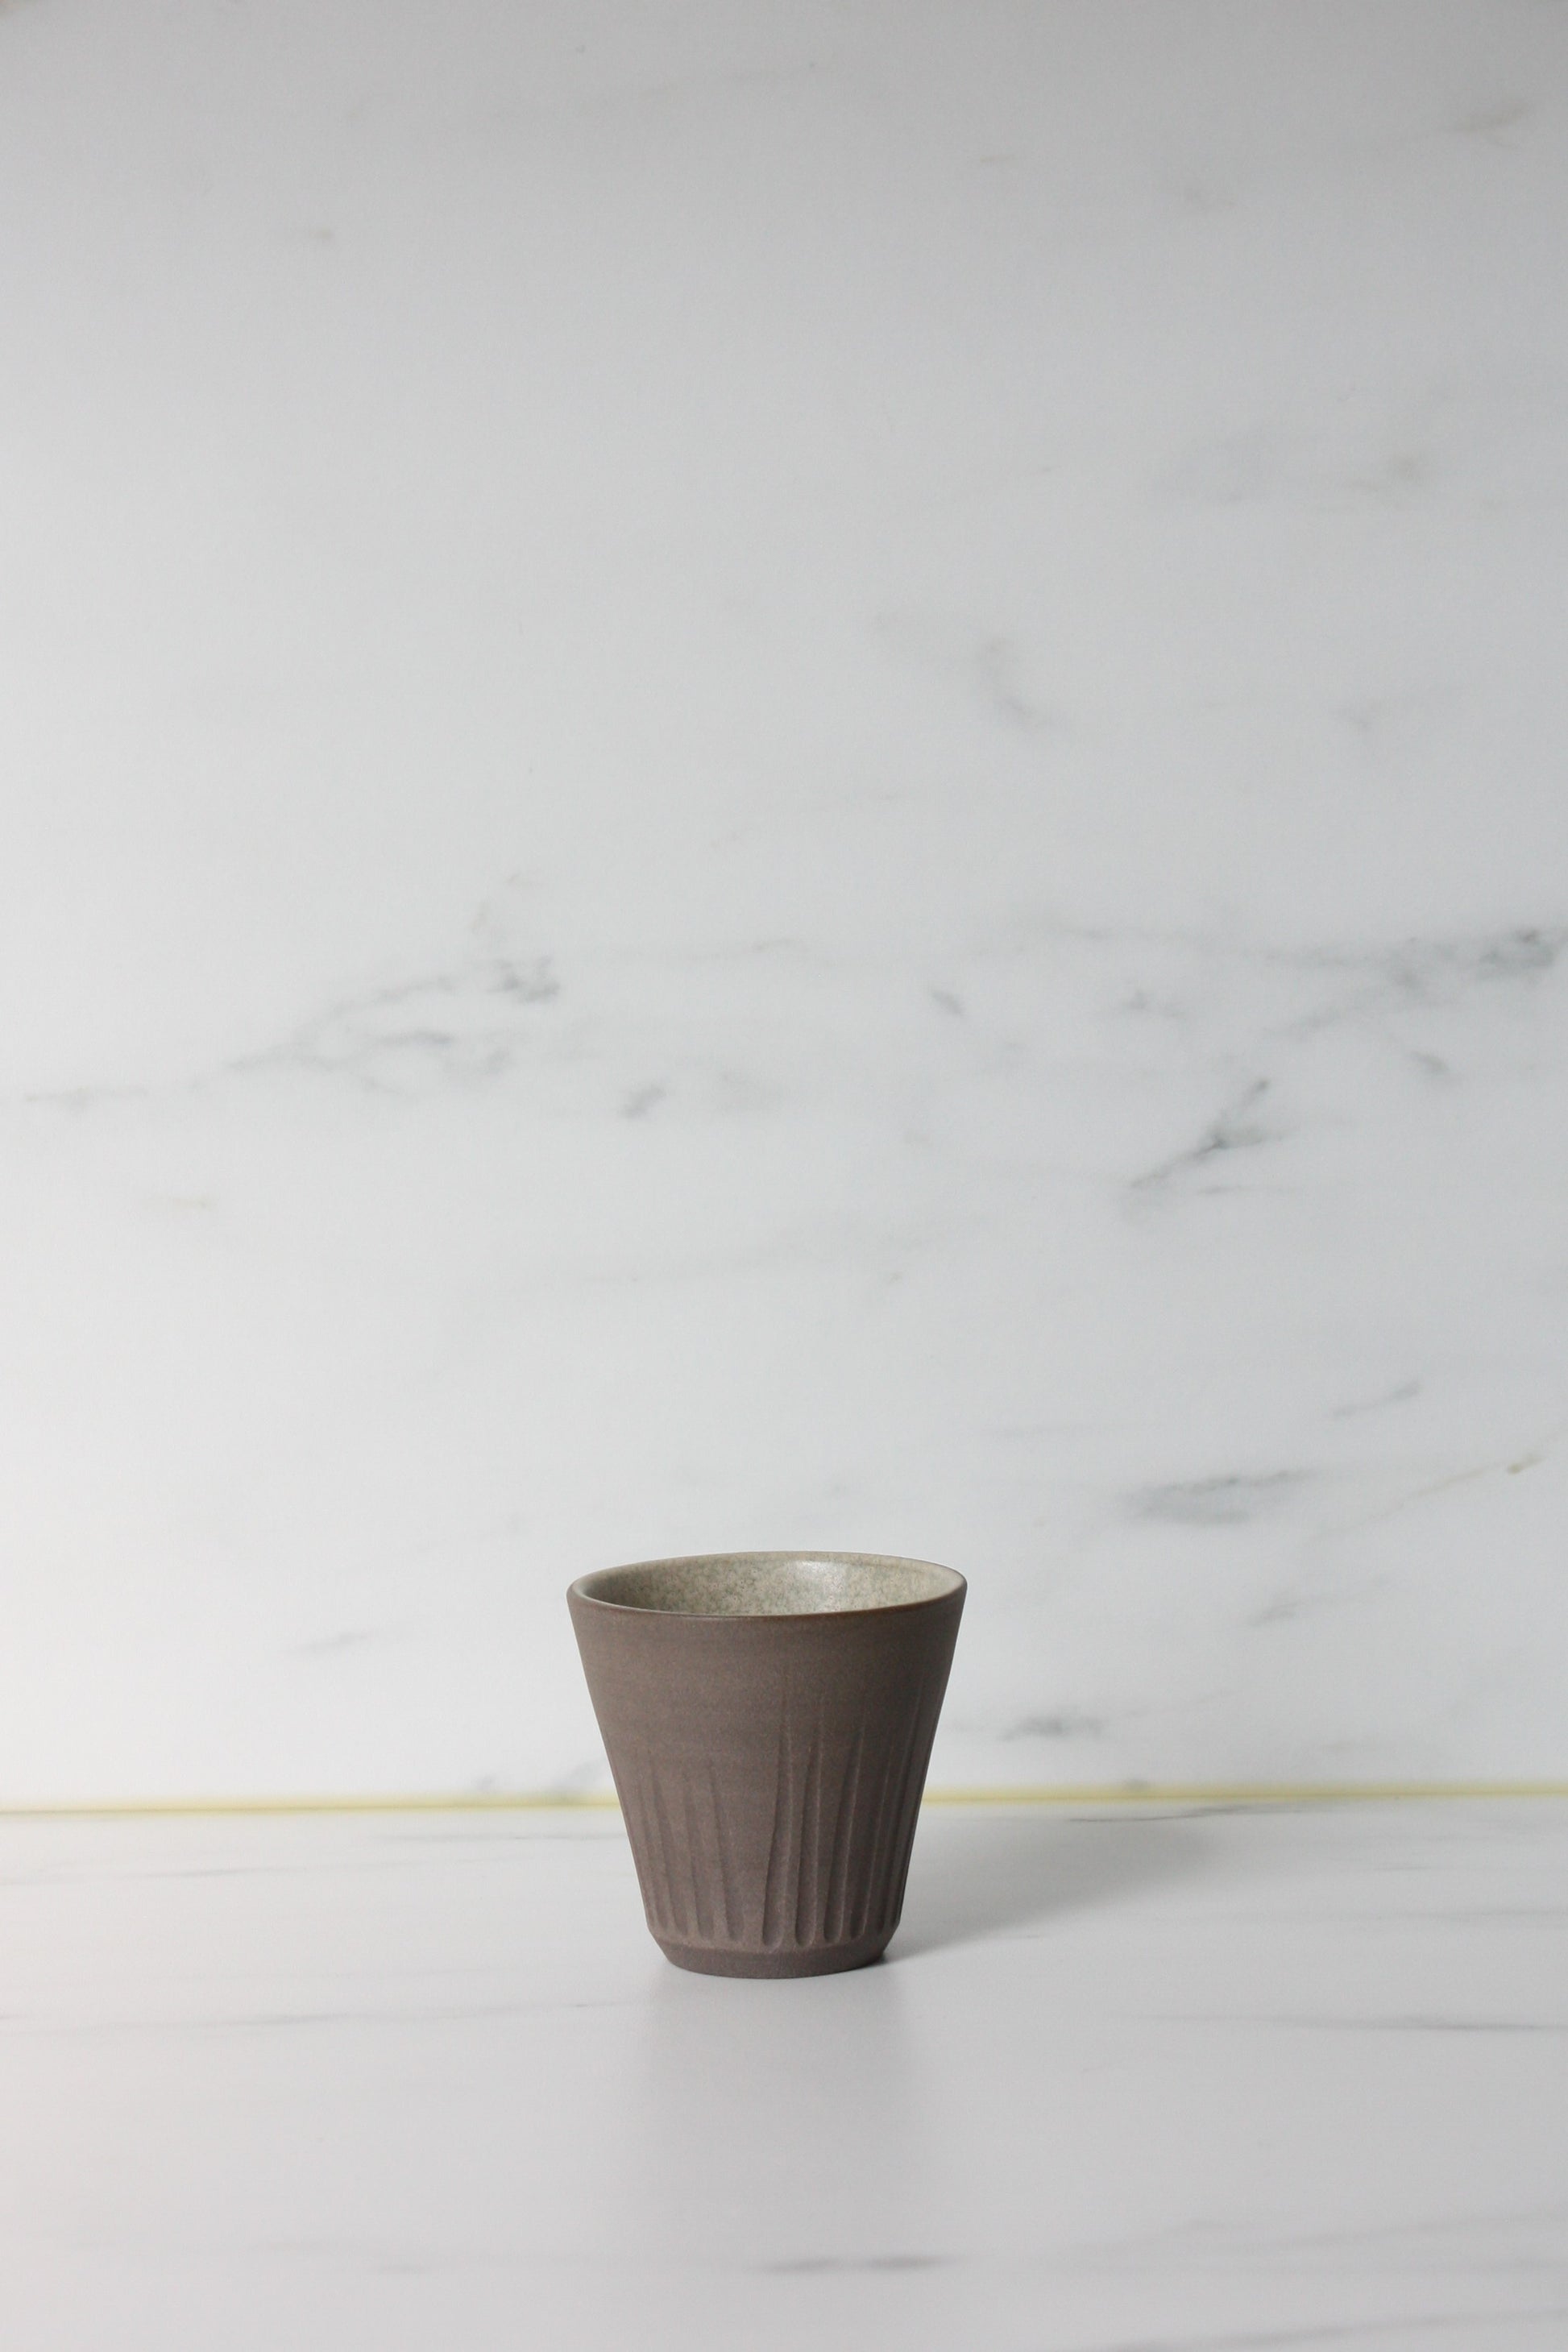 Photo of a grey coloured clay espresso pot on a white marble background.